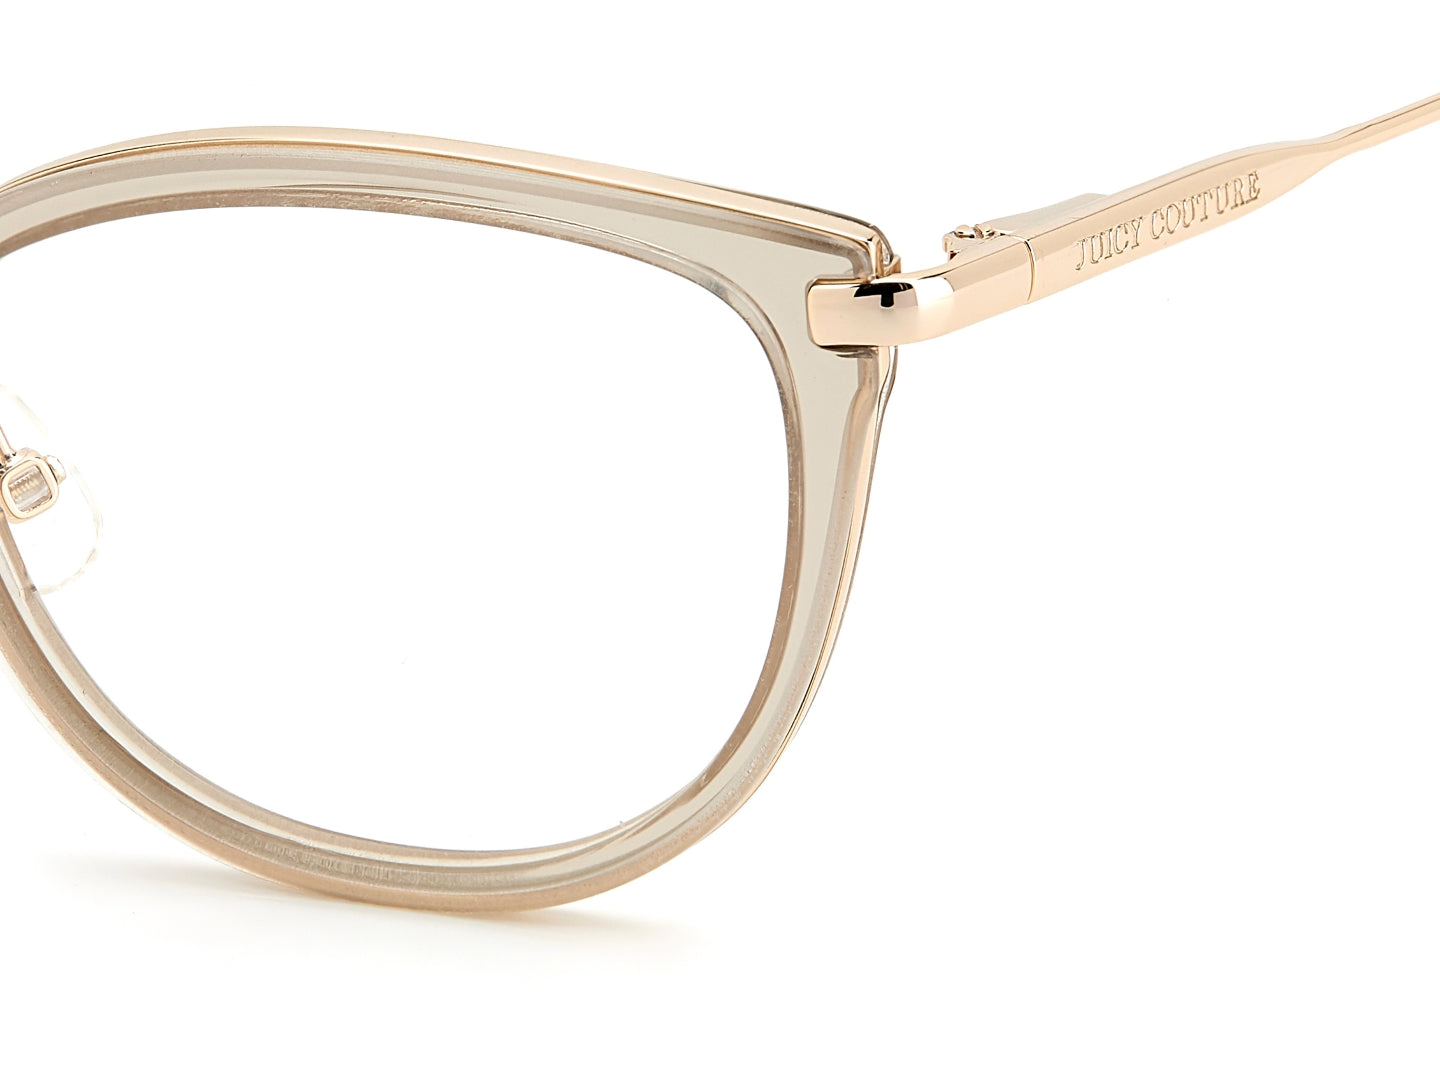 Juicy Couture Woman Round Eyeglasses